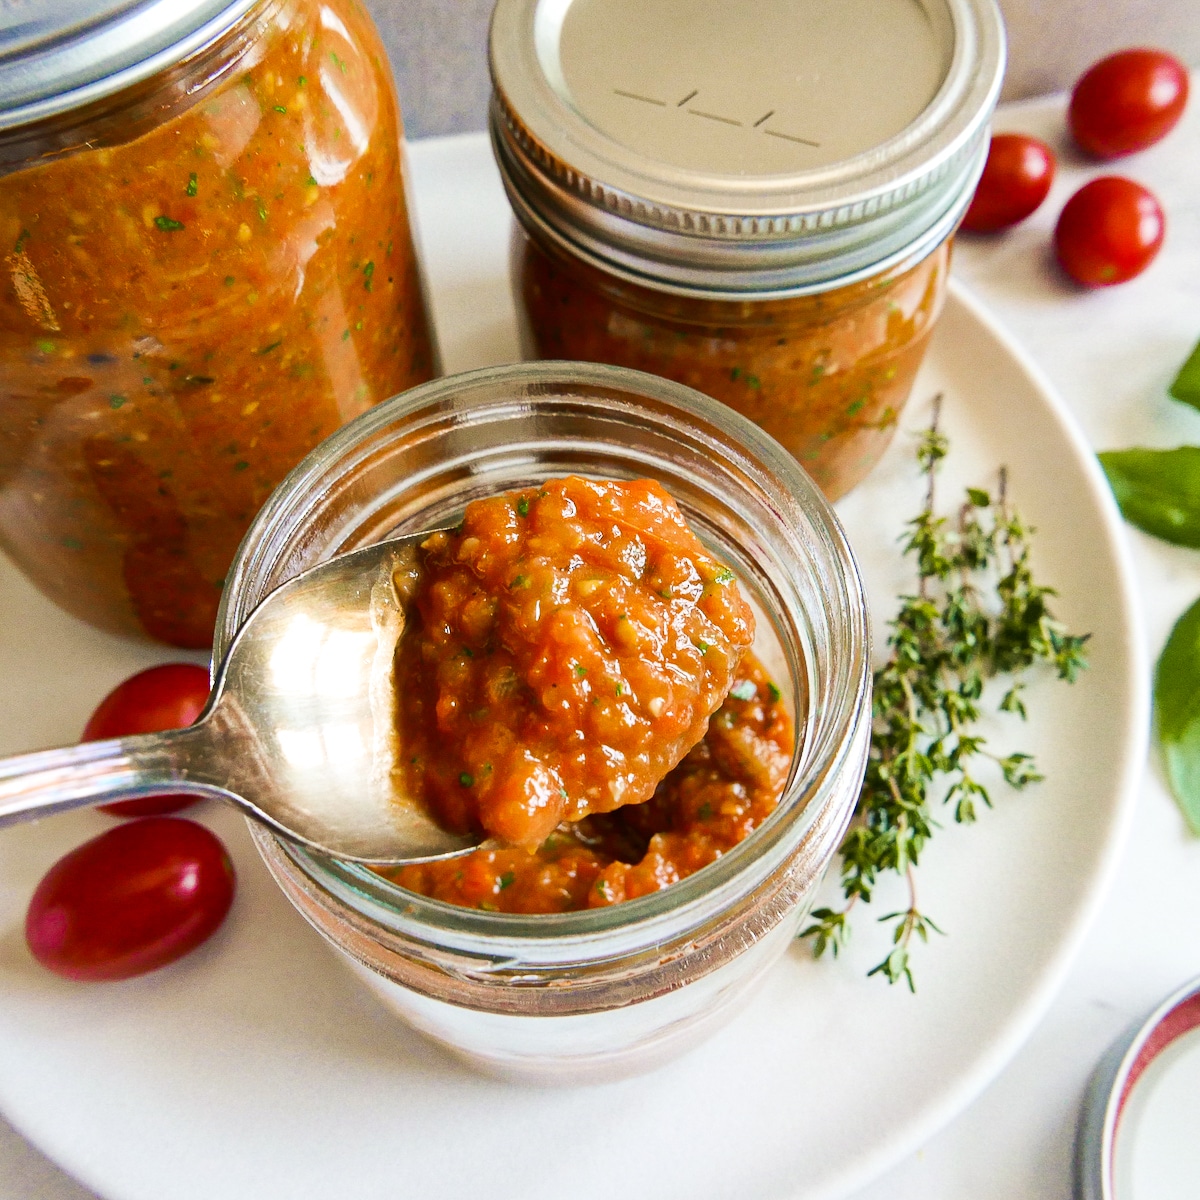 Spoonful of roasted cherry tomato sauce being lifted out of a jar.